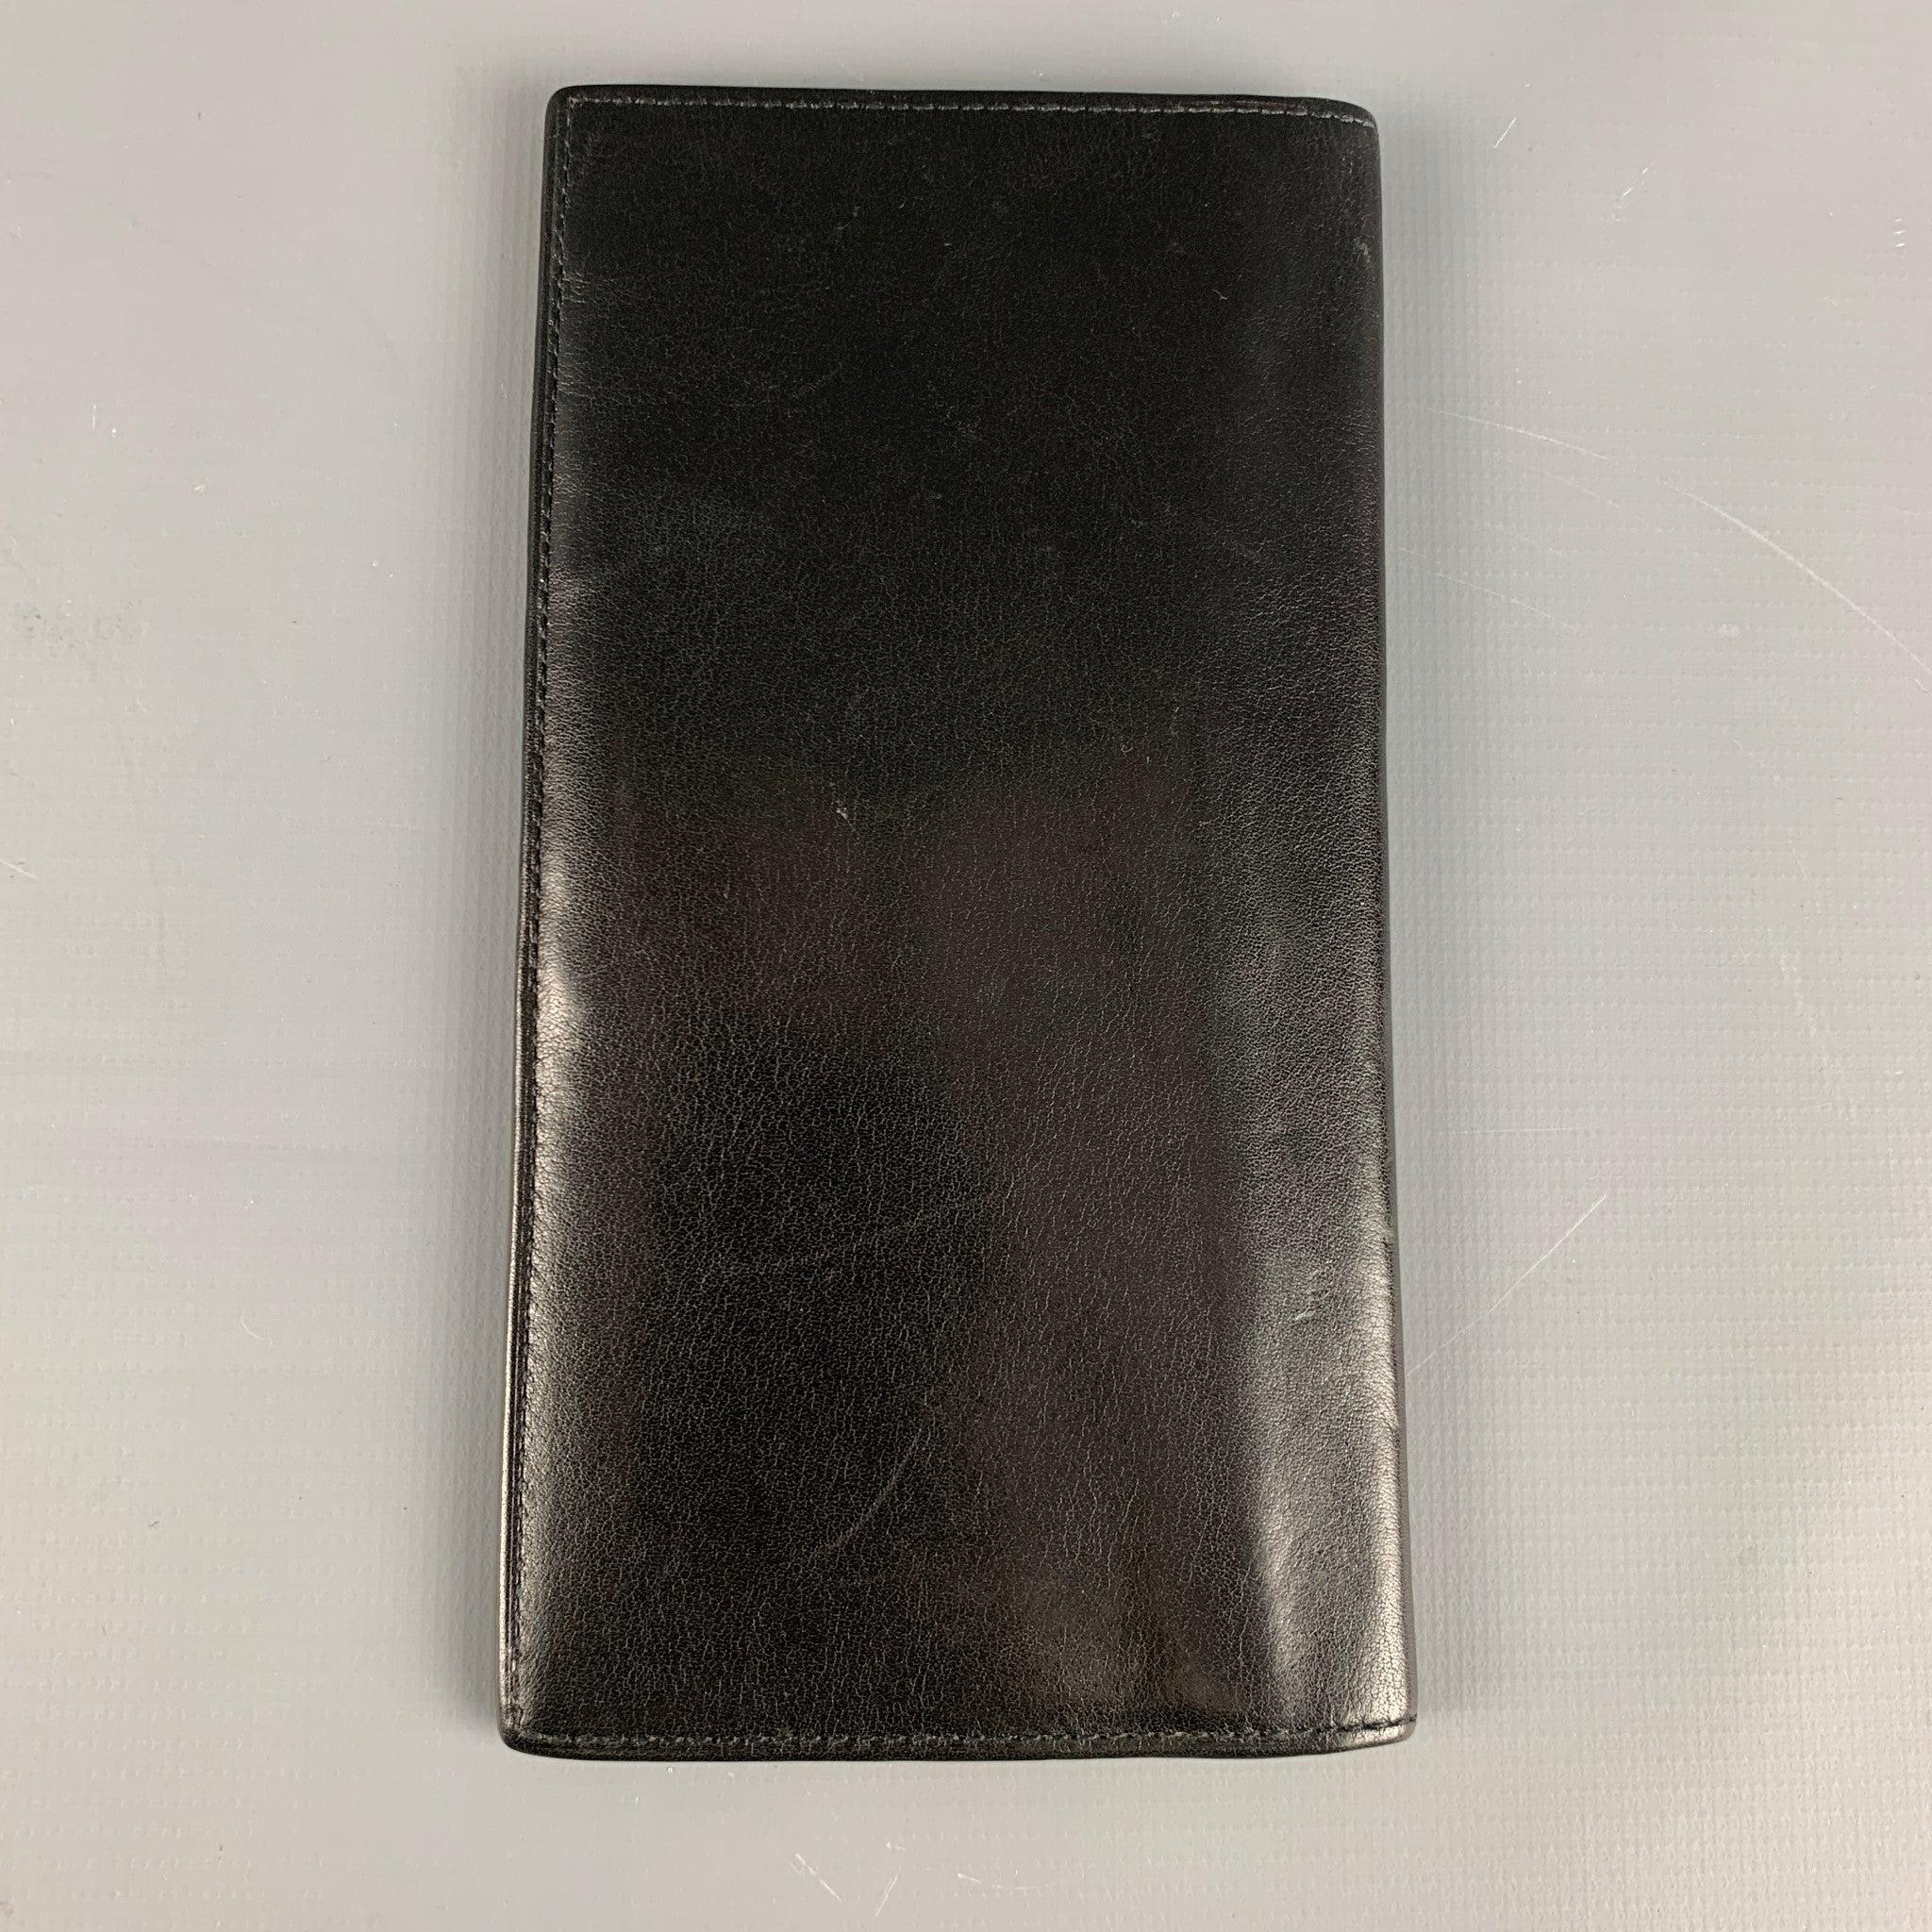 CHRISTIAN DIOR VINTAGE wallet comes in black leather with a folder design and inner slots.Very Good Pre-Owned Condition.7 x 3.5 inches  
  
  
 
Reference: 126035
Category: Wallet
More Details
    
Brand:  CHRISTIAN DIOR
Color:  Black
Material: 